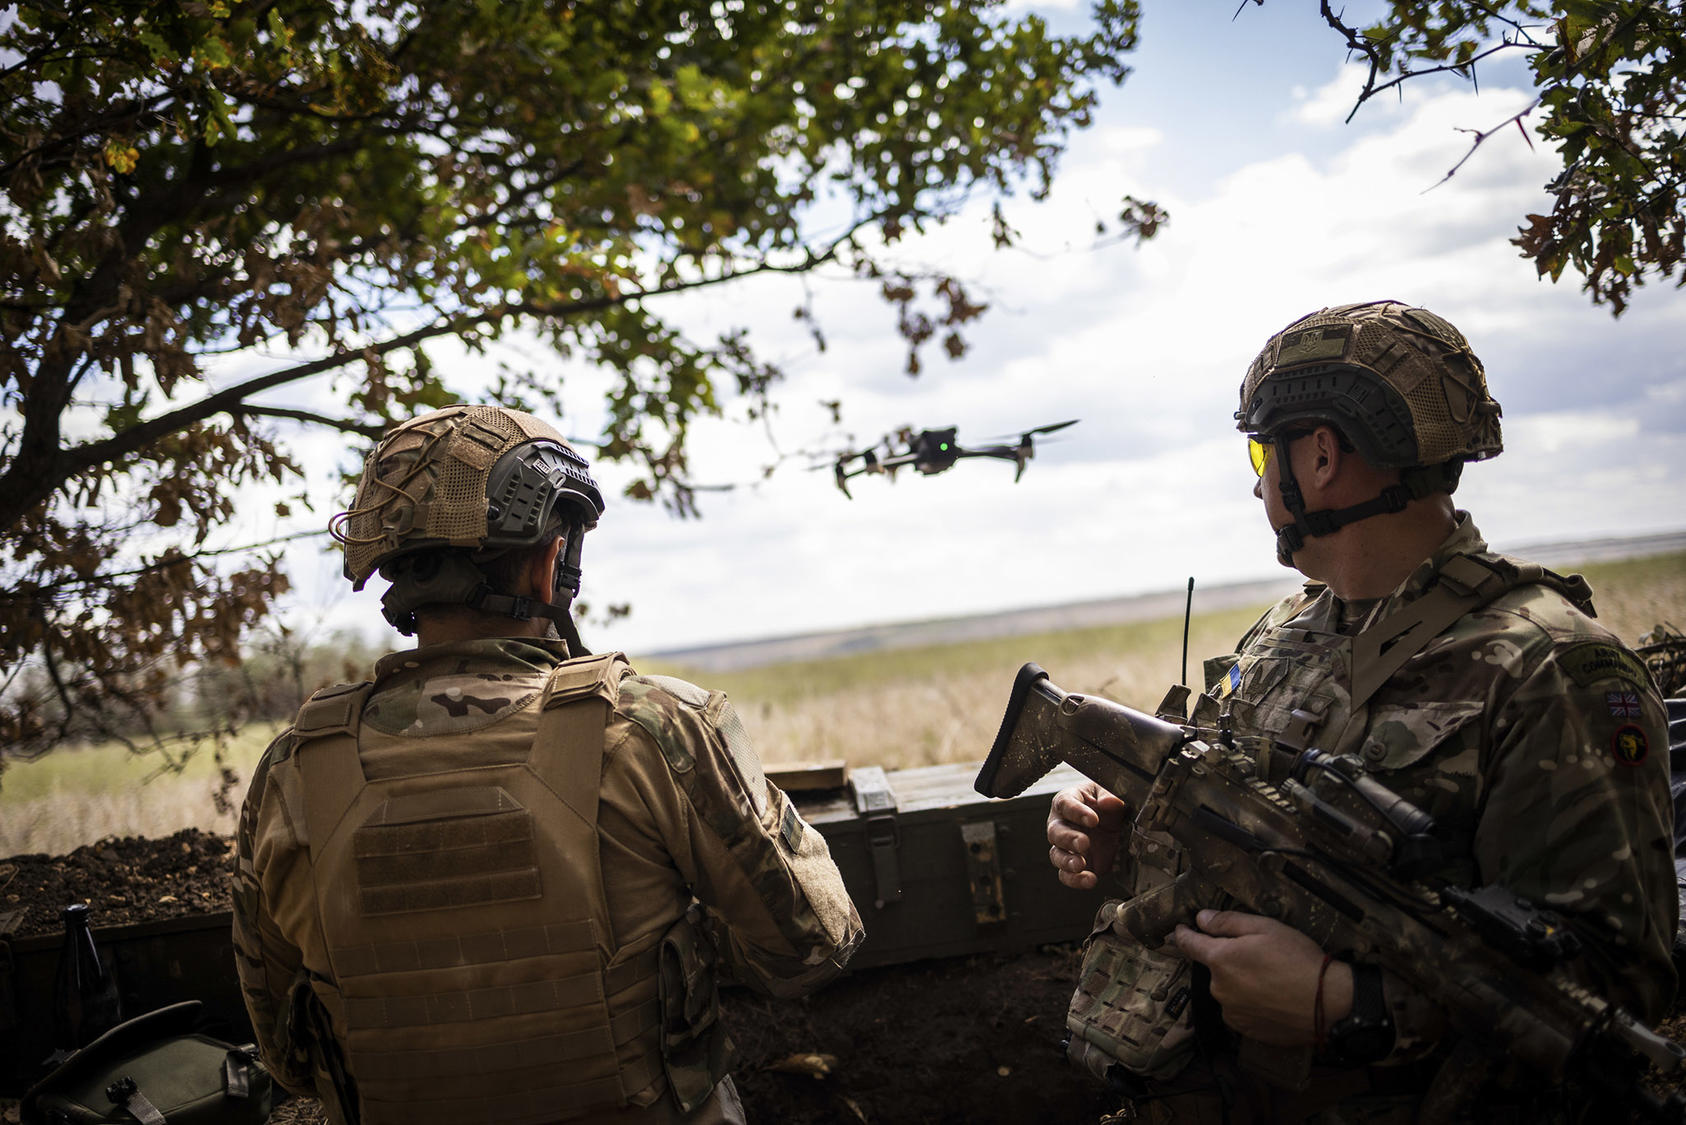 Ukrainian soldiers operate a drone near the frontlines of the war with Russia. (Jim Huylebroek/The New York Times)